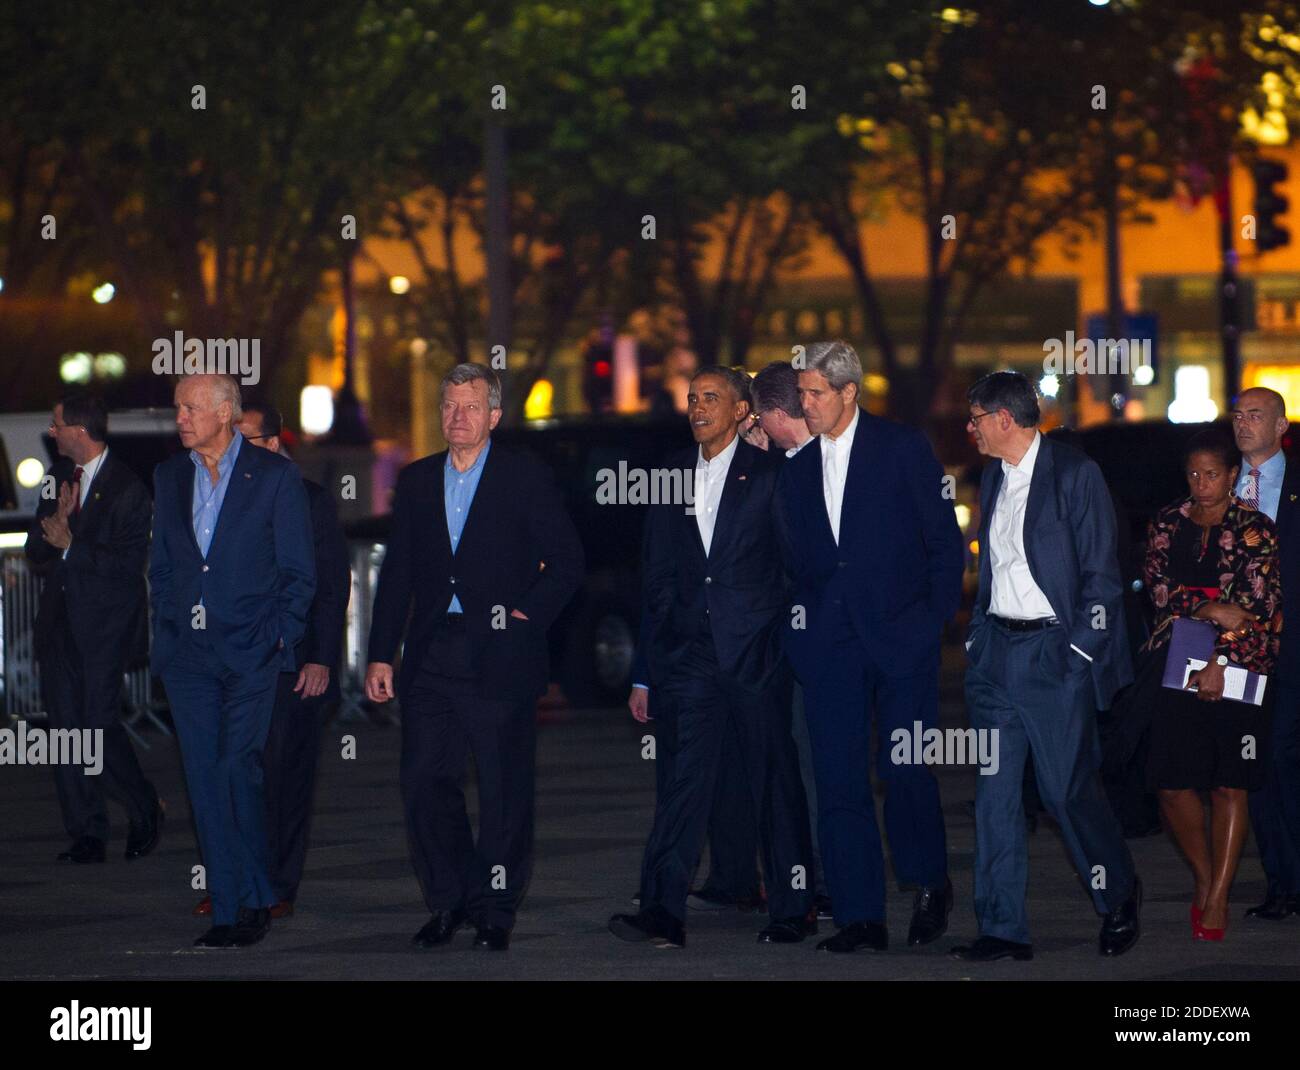 United States President Barack Obama (third from left) walks back to The White House with Vice President Joseph Biden, Jr. (left) U.S. Ambassador to the People's Republic of China Max Baucus (second from left) Secretary of State John Kerry (third from right) Secretary of the Treasury Jacob Lew (second from right) and National Security Advisor Susan Rice (right) following a private dinner with President of the People's Republic of China Xi Jinping in Washington, D.C., Thursday, Sept. 24, 2015, en route to a private dinner across the street at Blair House. Credit: Rod Lamkey Jr. / Pool via CNP / Stock Photo